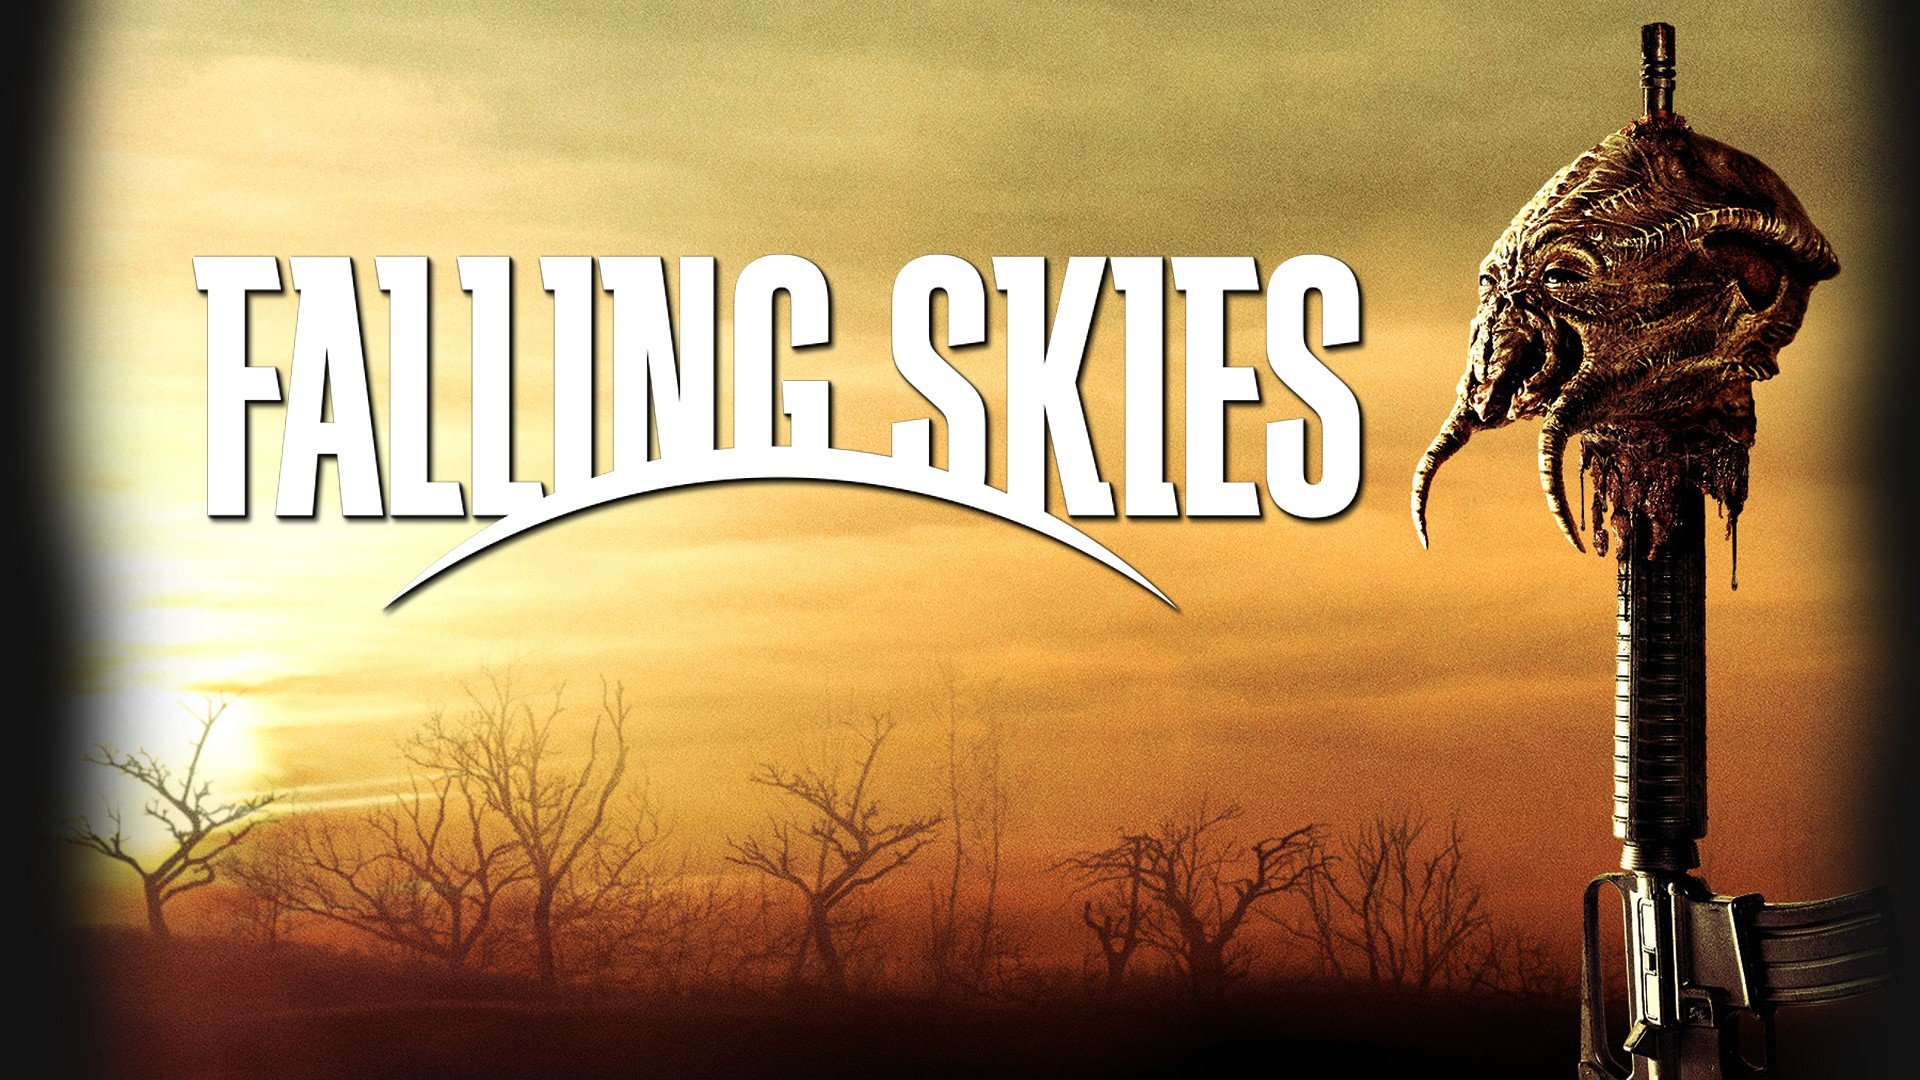 Falling Skies Action Series Sci Fi Thriller Apocalyptic